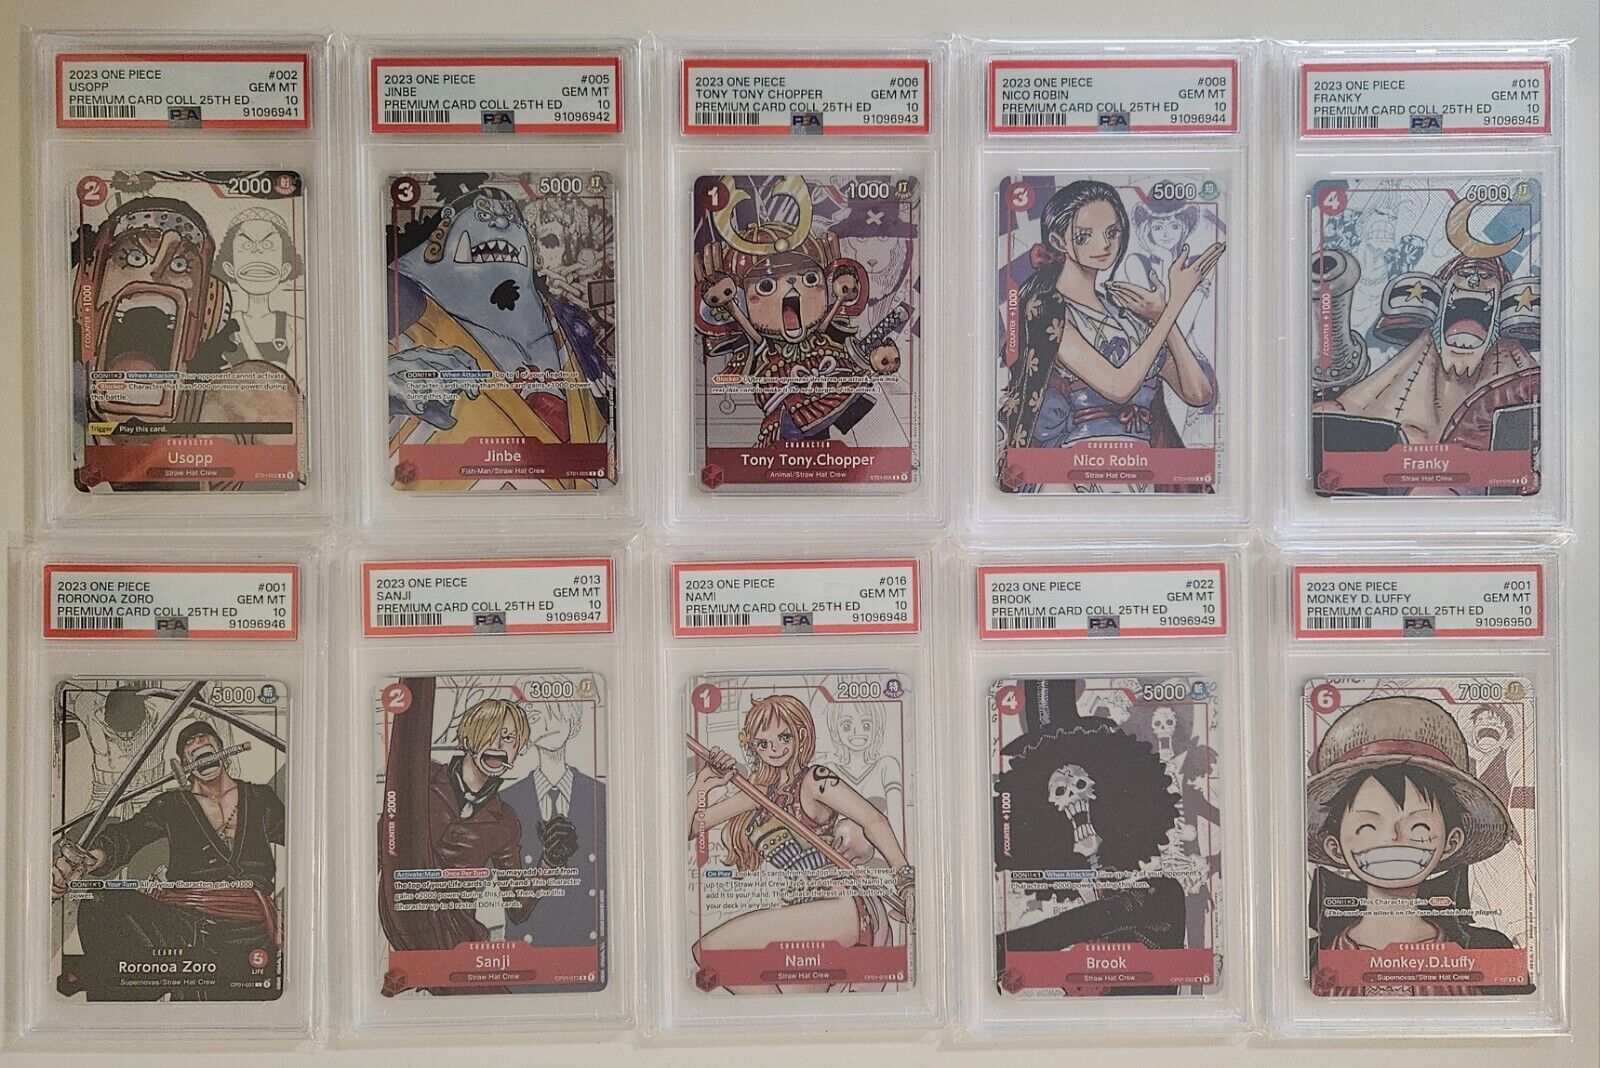 One Piece Premium Card Collection 25th Anniversary English PSA 10 Sequential Set